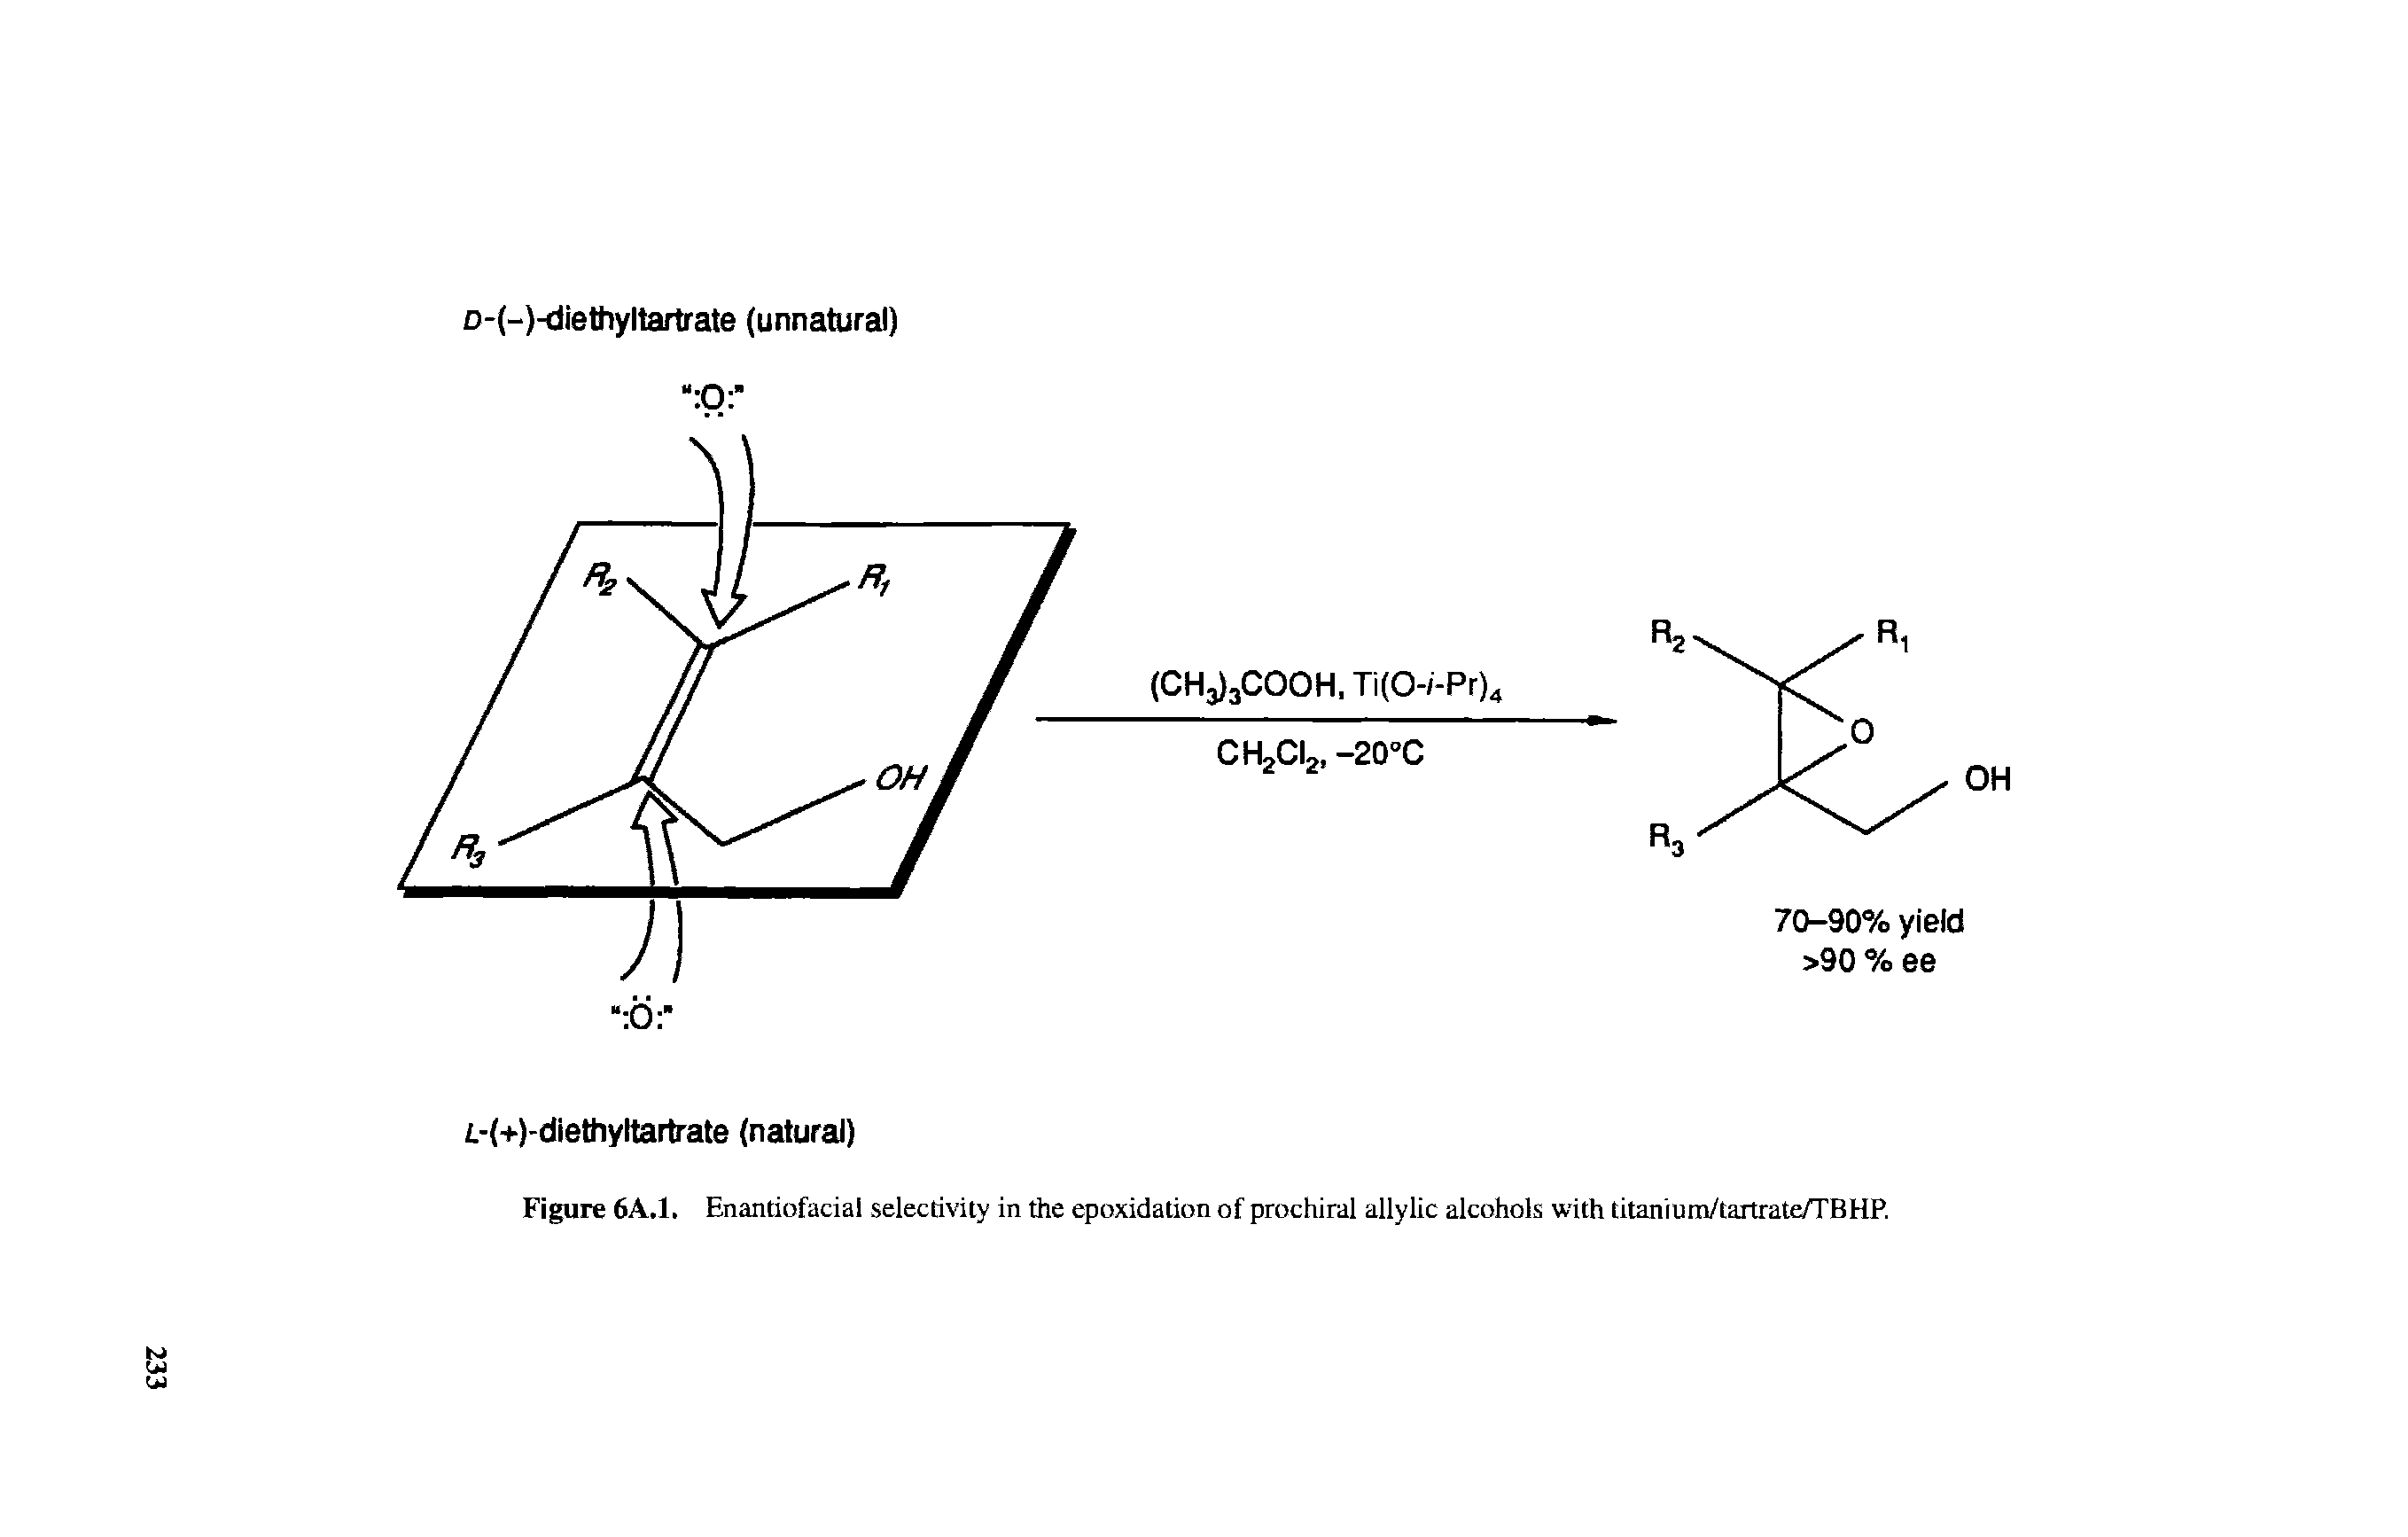 Figure 6A.1. Enantiofacial selectivity in the epoxidation of prochiral allylic alcohols with titanium/tartrate/TBHP.